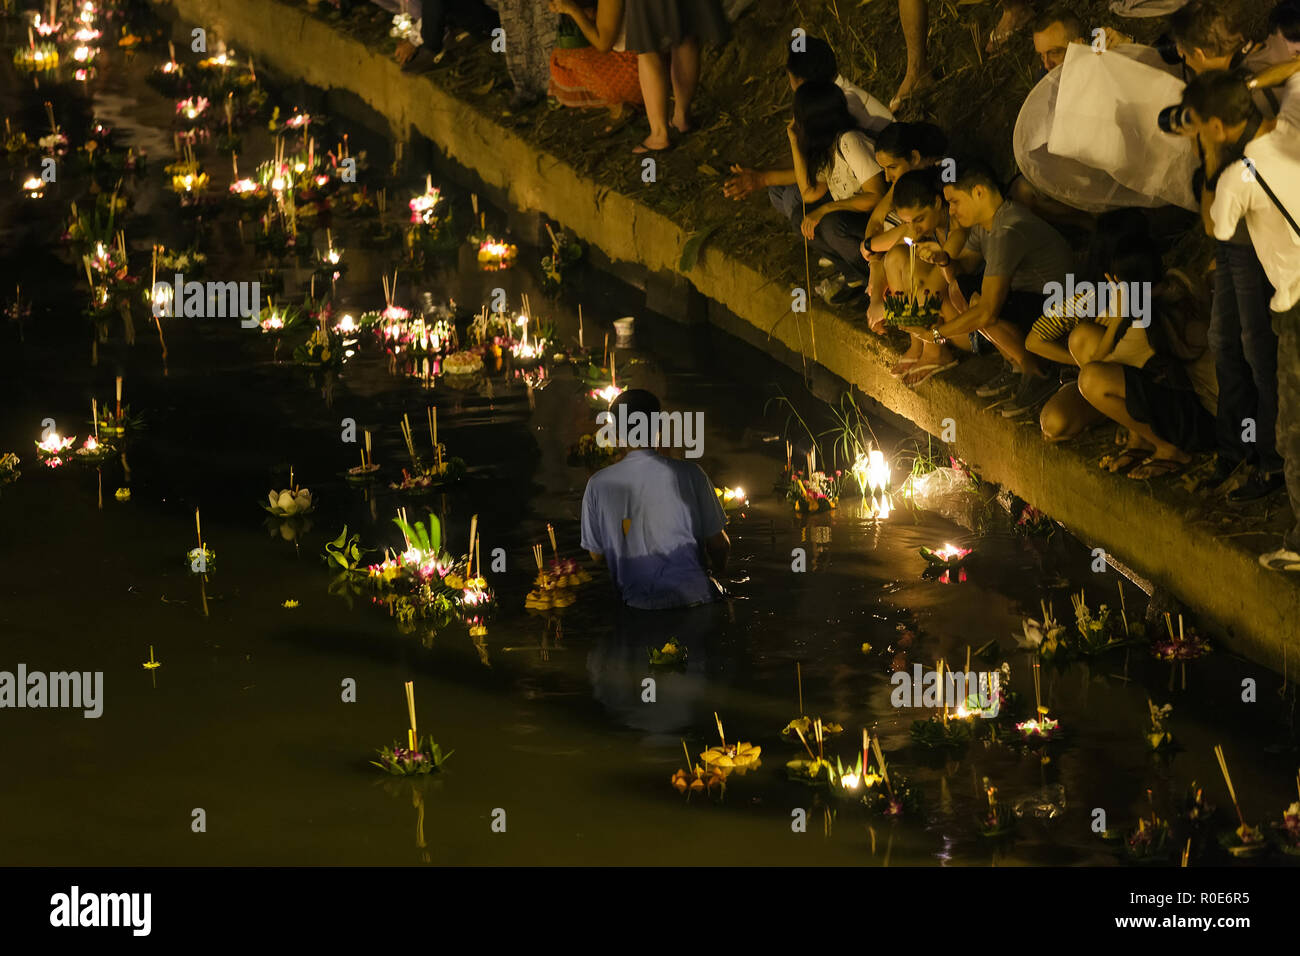 CHIANGMAI THAILAND NOVEMBER 28  : thai people releasing floating offerings  in Loy Krathong and Yi Peng Festival on november 28, 2012 Chiangmai, Thail Stock Photo